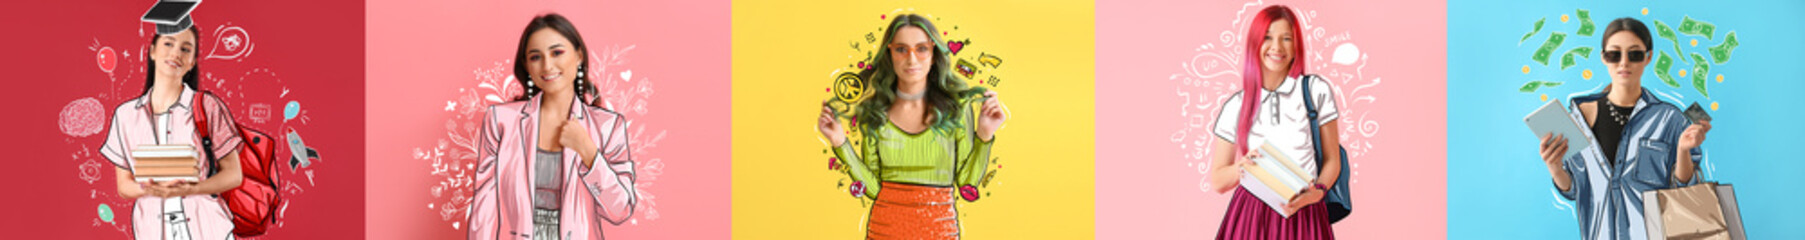 Set of different fashionable women on colorful background